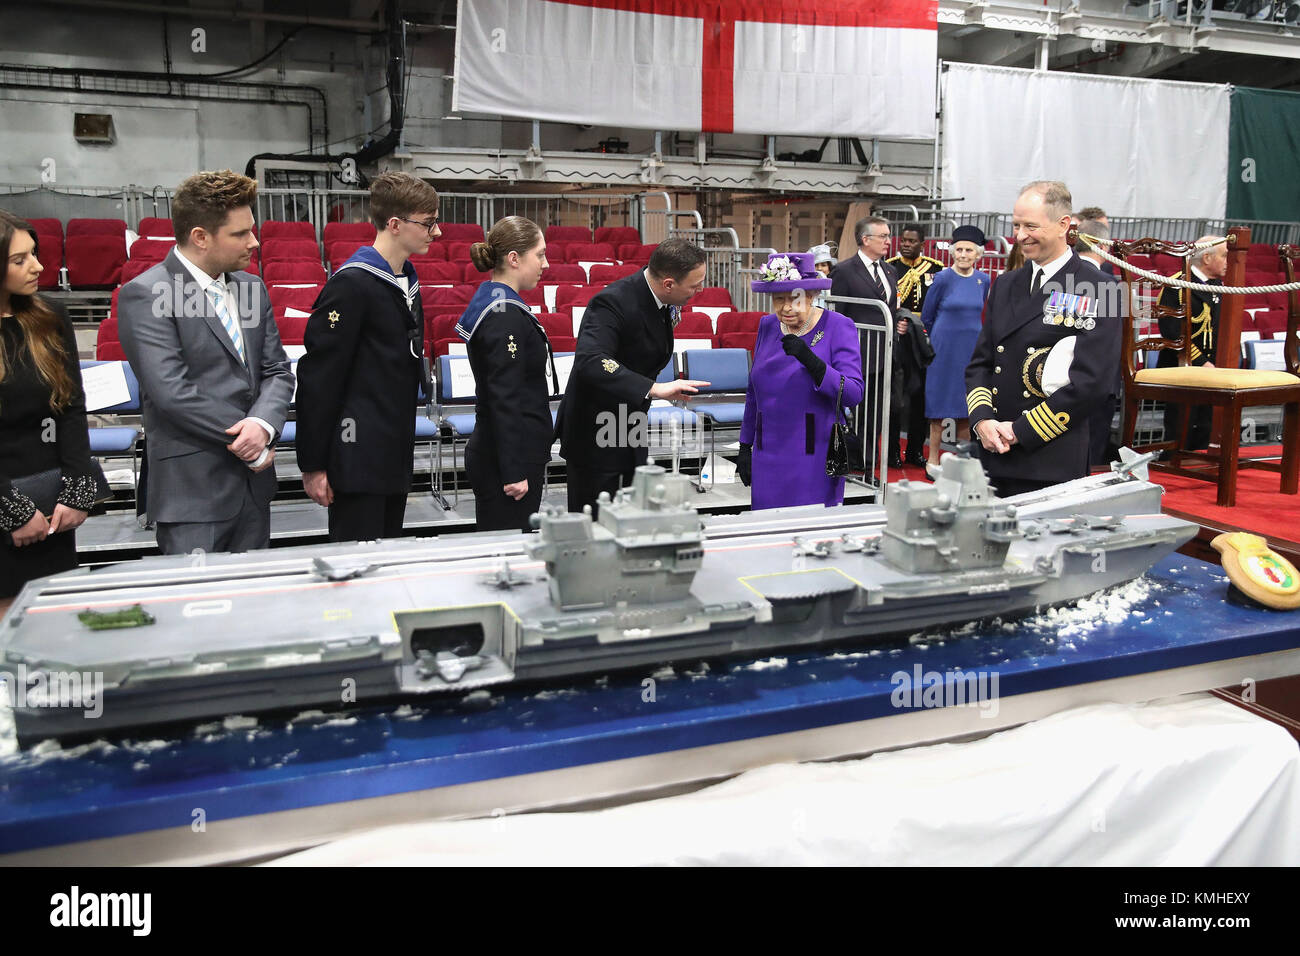 Queen Elizabeth II, and the ship's Captain, Commodore Jerry Kyd (right), view a cake HMS Queen Elizabeth, during the commissioning of HMS Queen Elizabeth, Britain's biggest and most powerful warship, into the Royal Navy Fleet at Portsmouth Naval Base. Stock Photo